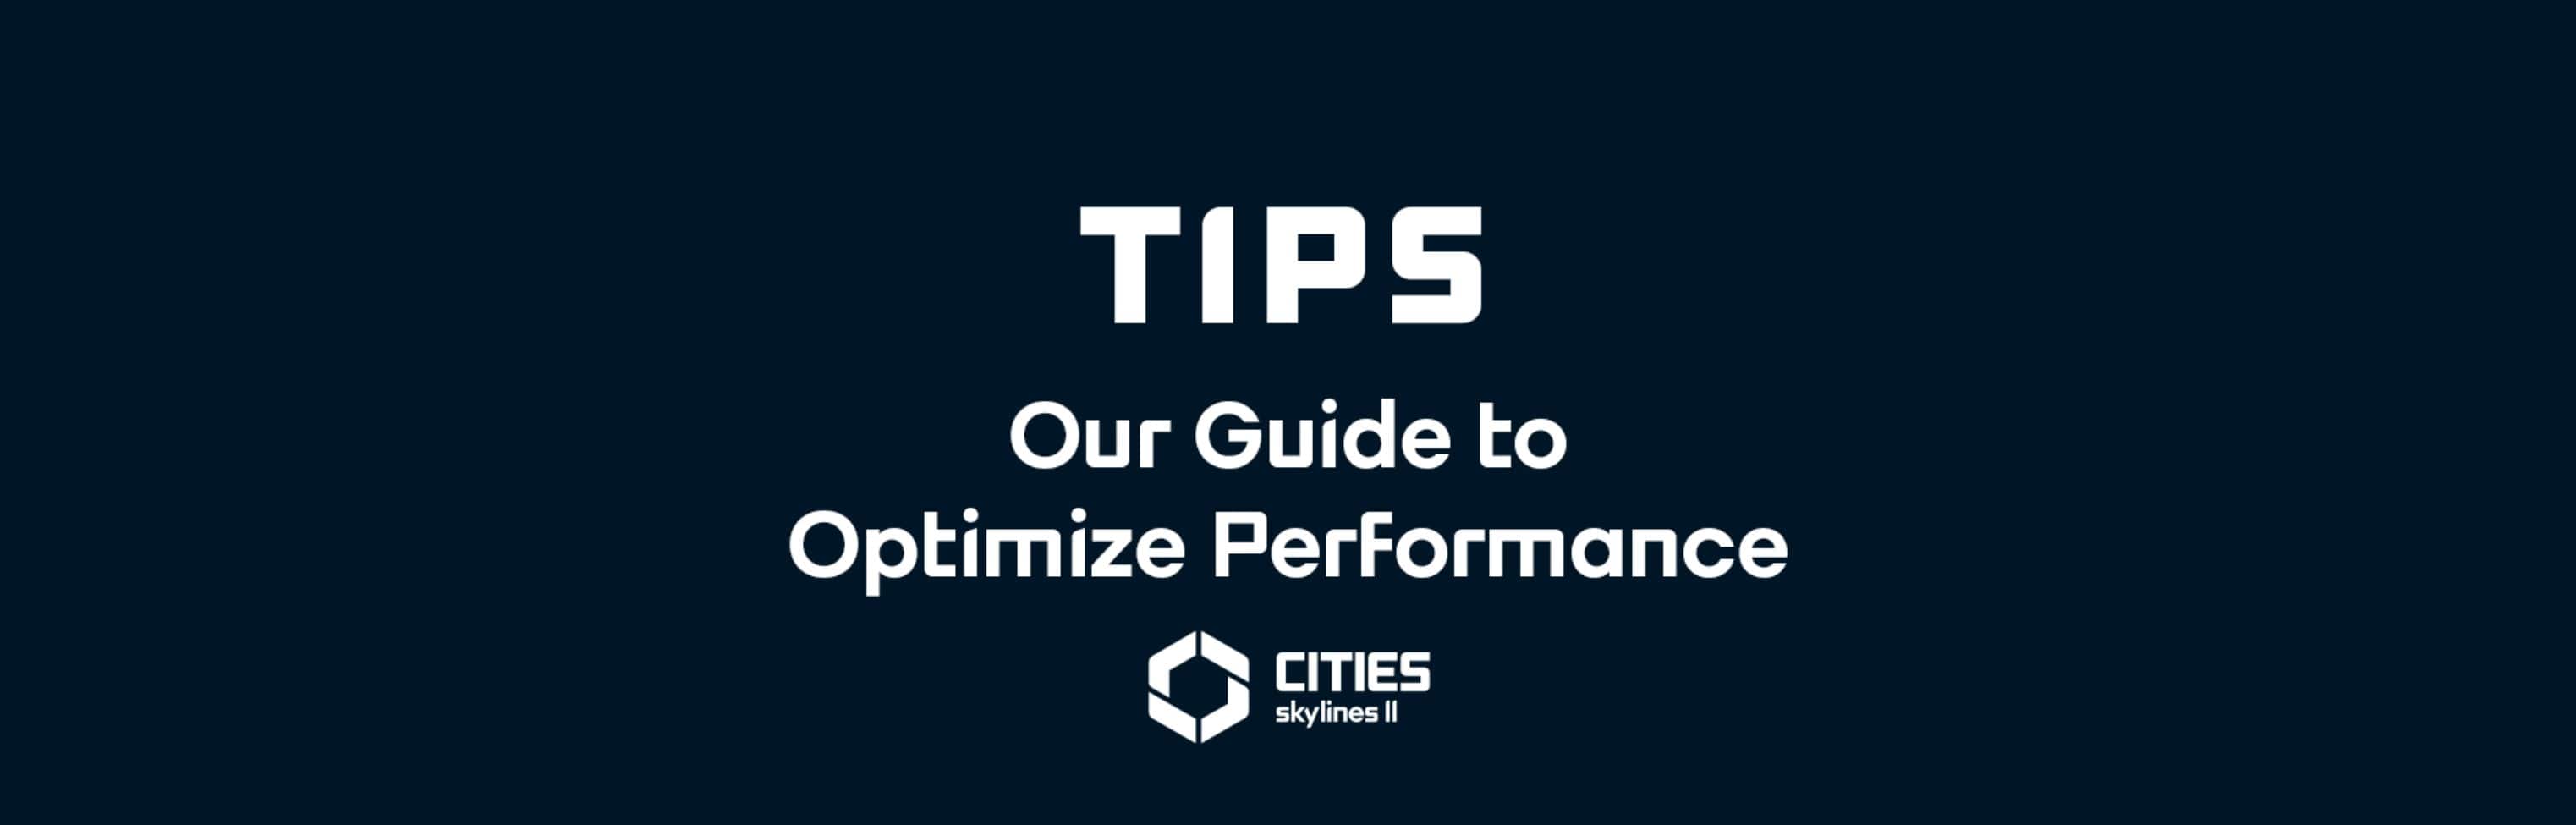 Updates on Modding and Performance for Cities: Skylines II